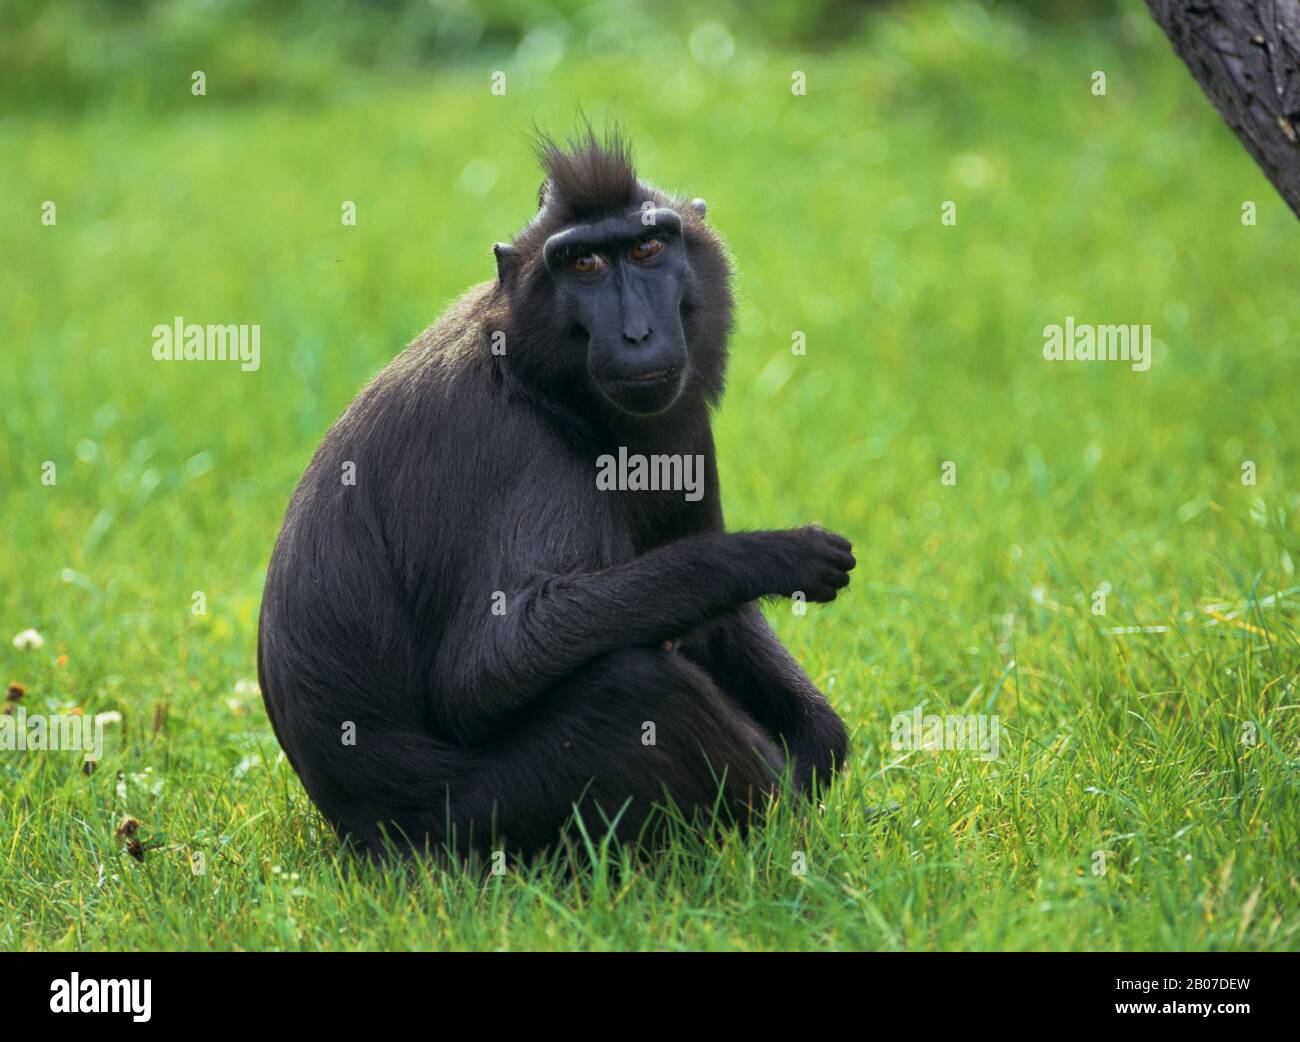 crested gibbon, black-crested Gibbon (Hylobates concolor), sits in a meadow Stock Photo